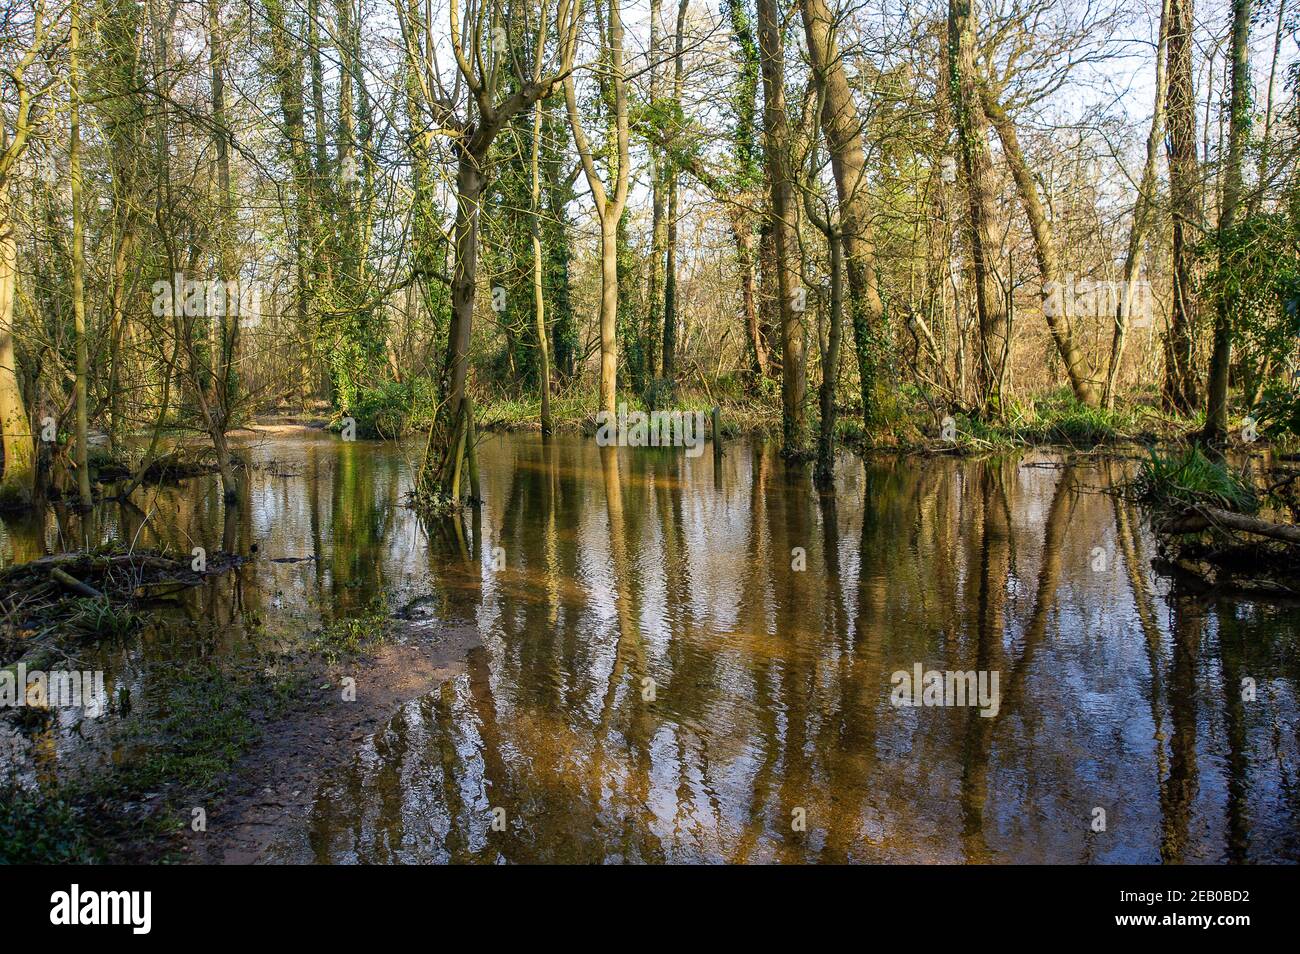 Denham, Buckinghamshire, UK. 11th February, 2021. Flooded public footpaths in  Denham Country Park. Following recent heavy rainfall the River Colne in Denham Country Park has burst its banks. Due to sustained freezing temperatures, both patches of snow and flooding remain in parts of the park. Credit: Maureen McLean/Alamy Live News Stock Photo